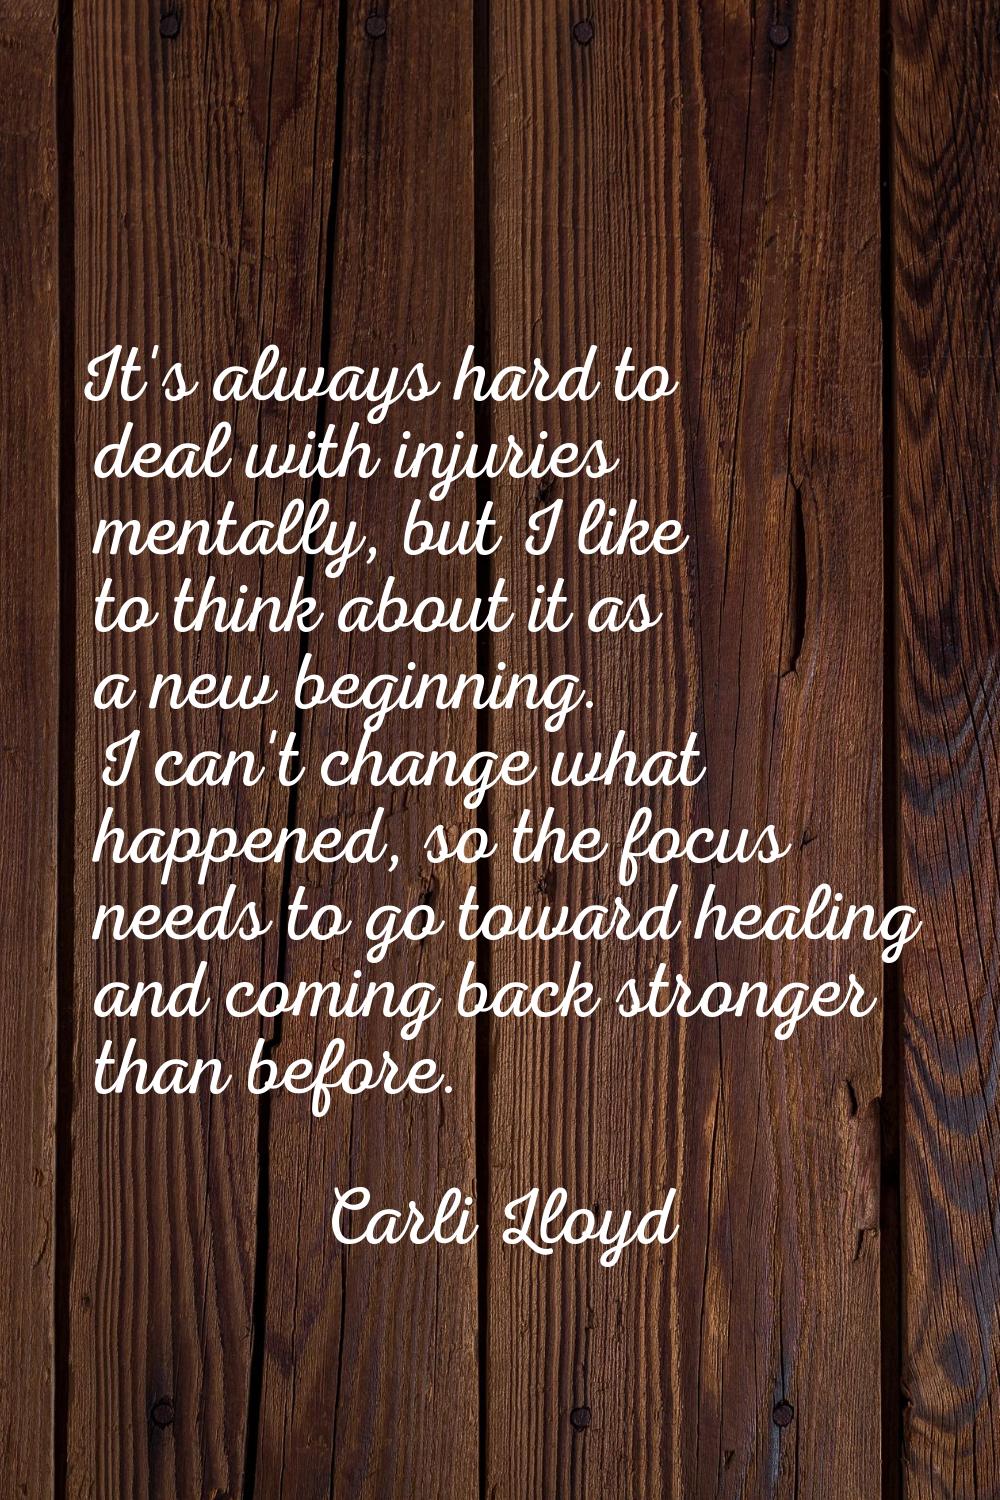 It's always hard to deal with injuries mentally, but I like to think about it as a new beginning. I